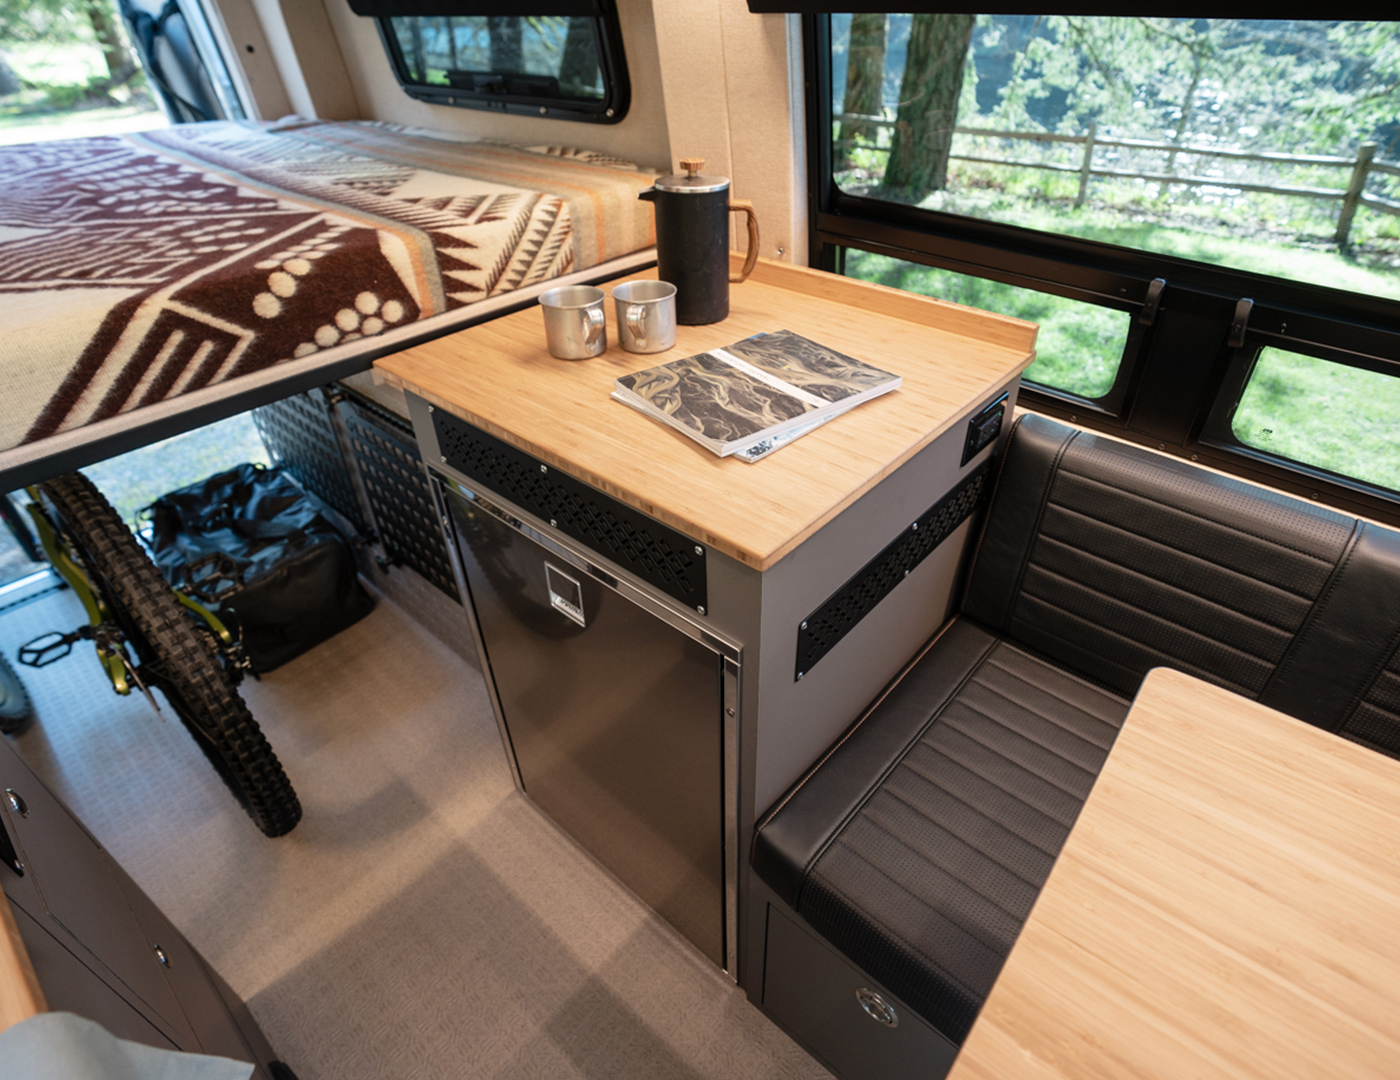 Helix by Outside Van. A Mercedes Benz Sprinter 144 built in Portland, Oregon for off road travel